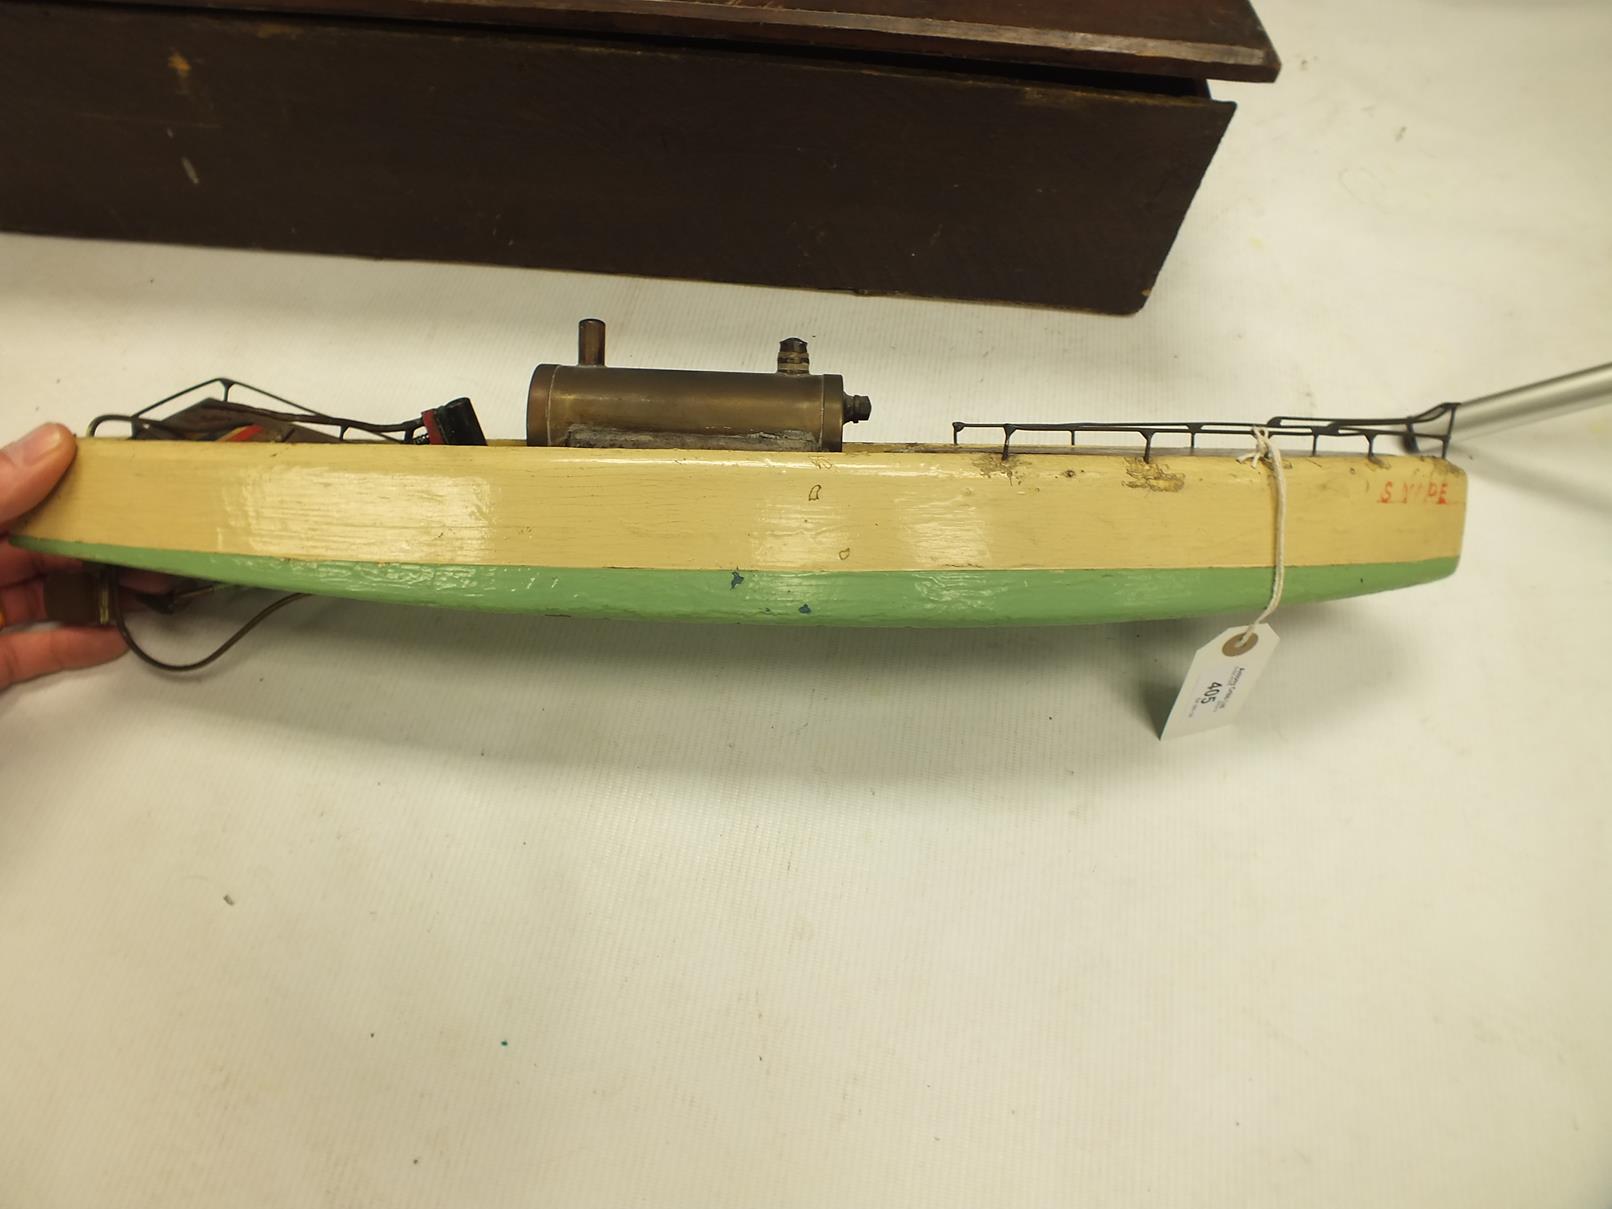 A BOWMAN HOBBIES STEAM SPEEDBOAT "SNIPE", with steam mechanism, the hull painted cream and green ( - Image 5 of 10